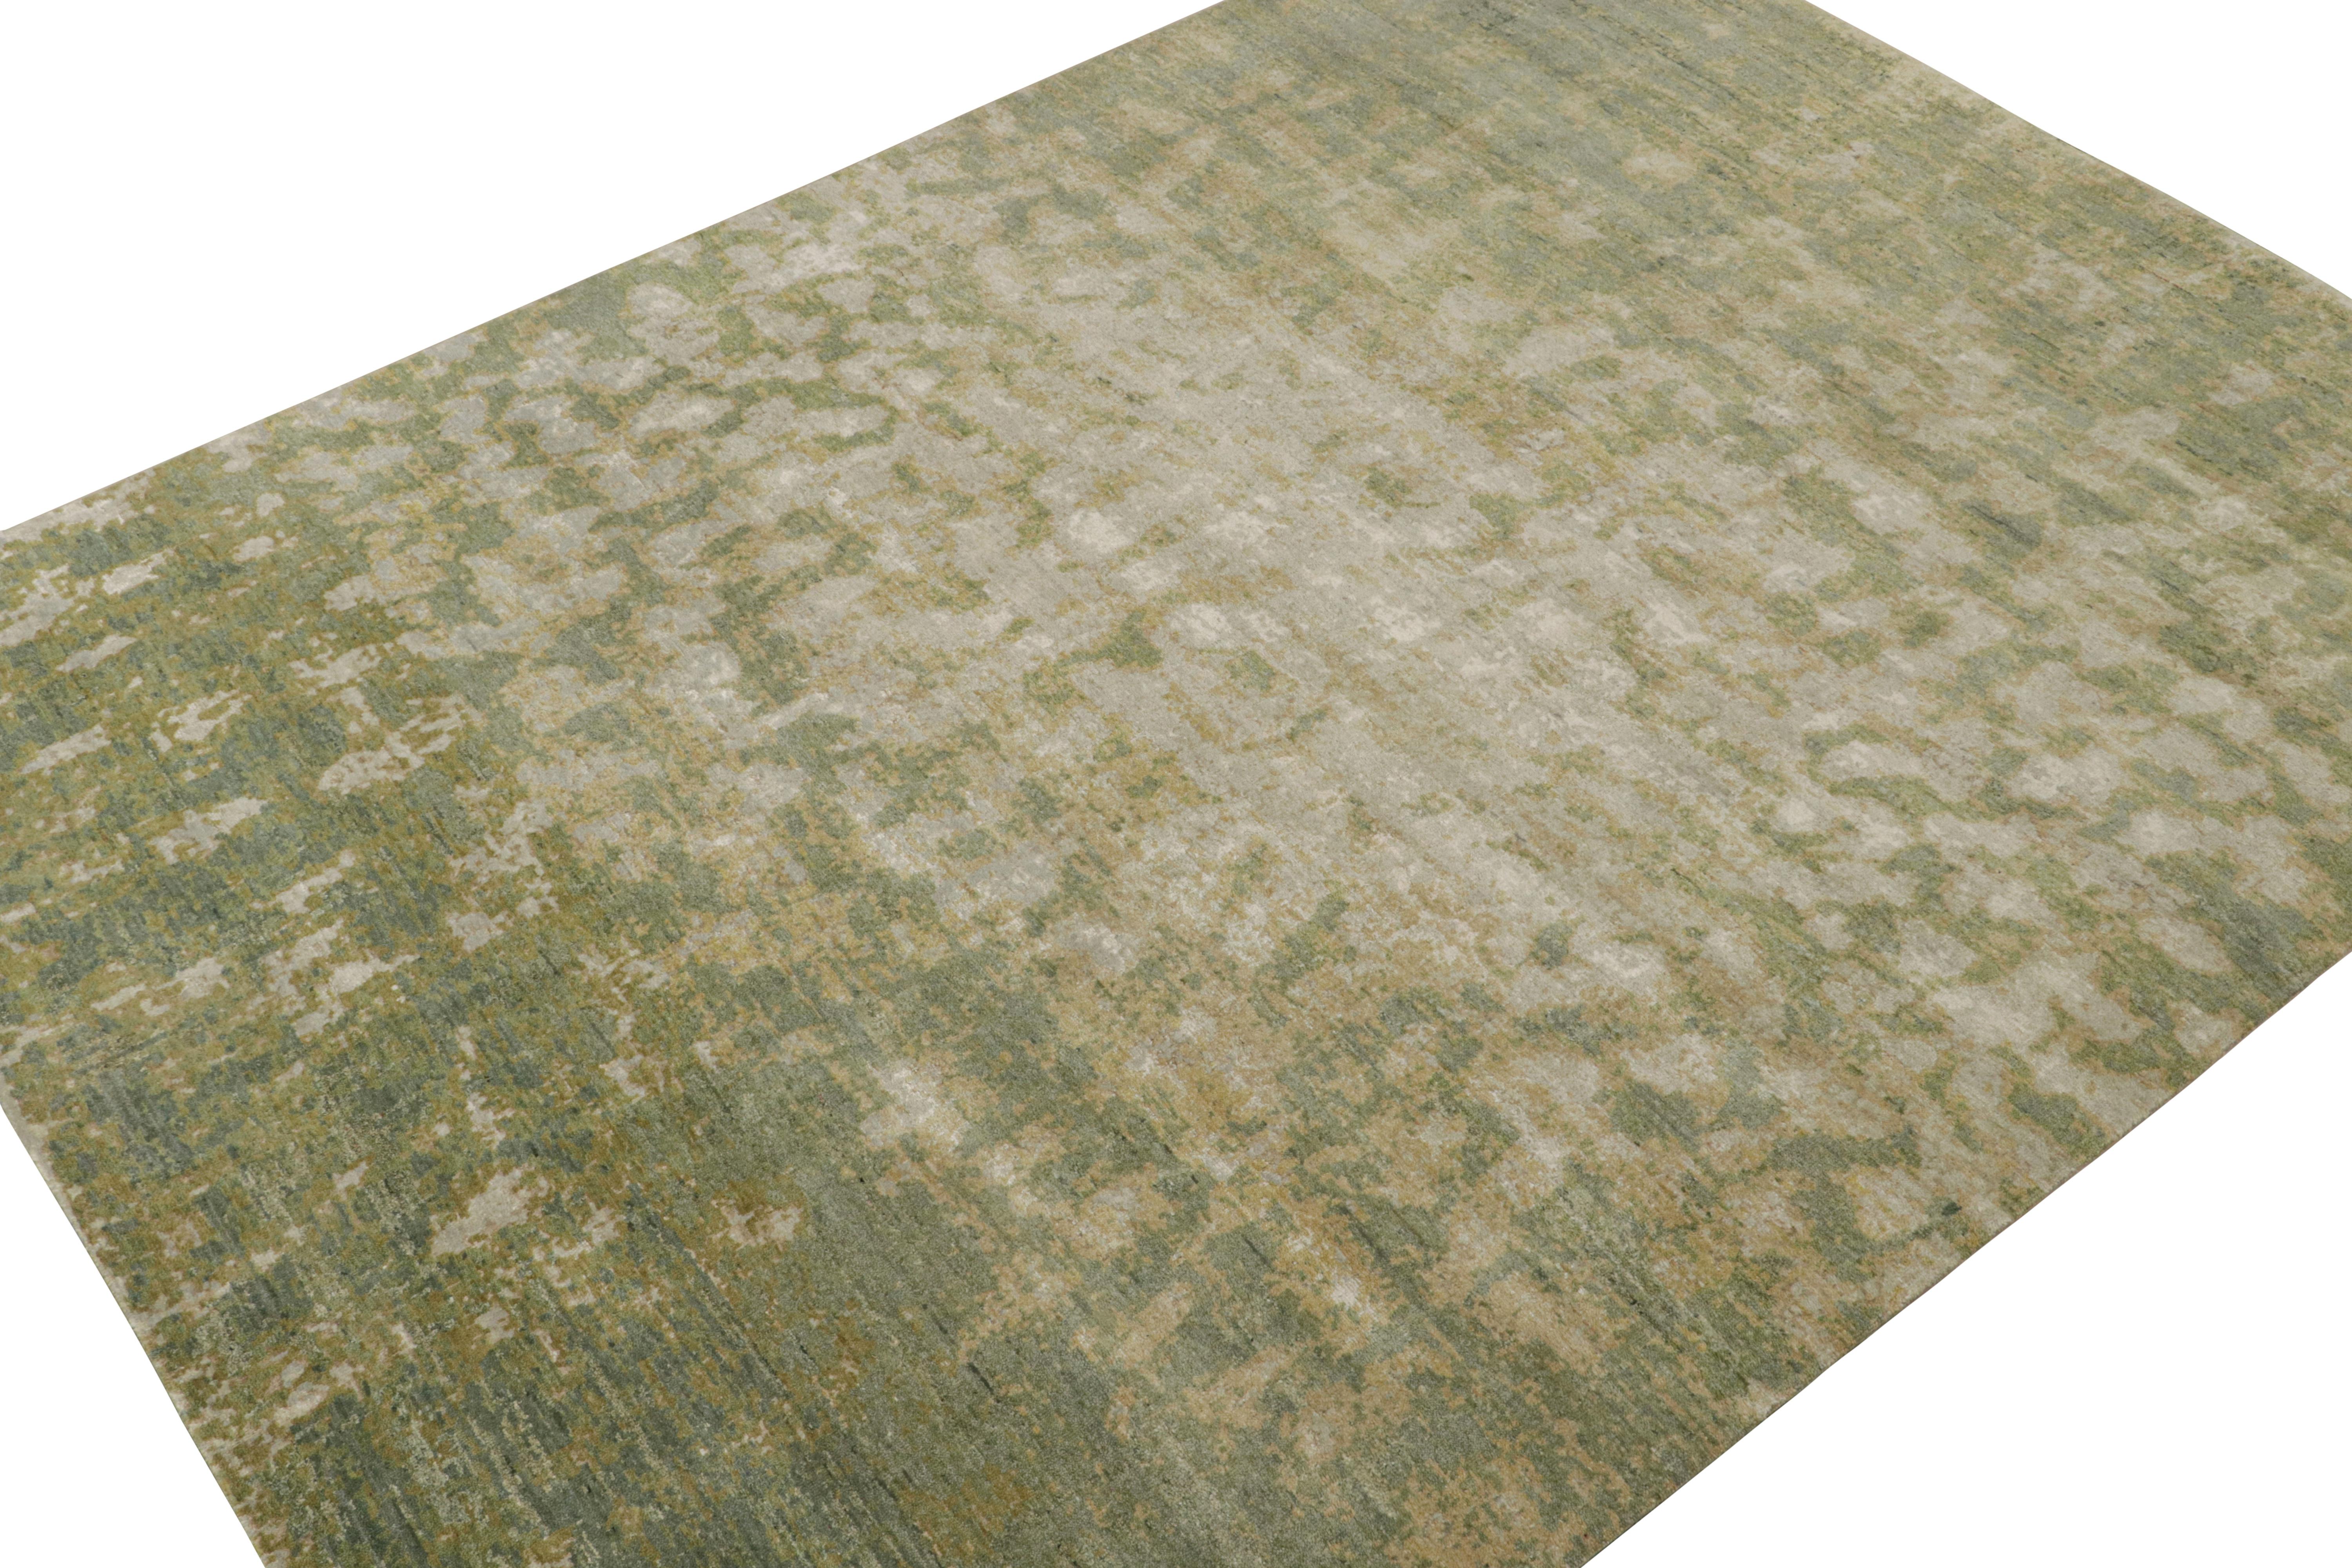 Hand-knotted in wool, silk & cotton, a 9x12 abstract rug from Rug & Kilim’s Modern collection.

On the Design: 

This rug enjoys a pattern like watercolor paintings in green, gold and gray, with some chartreuse accents. Connoisseurs will admire the